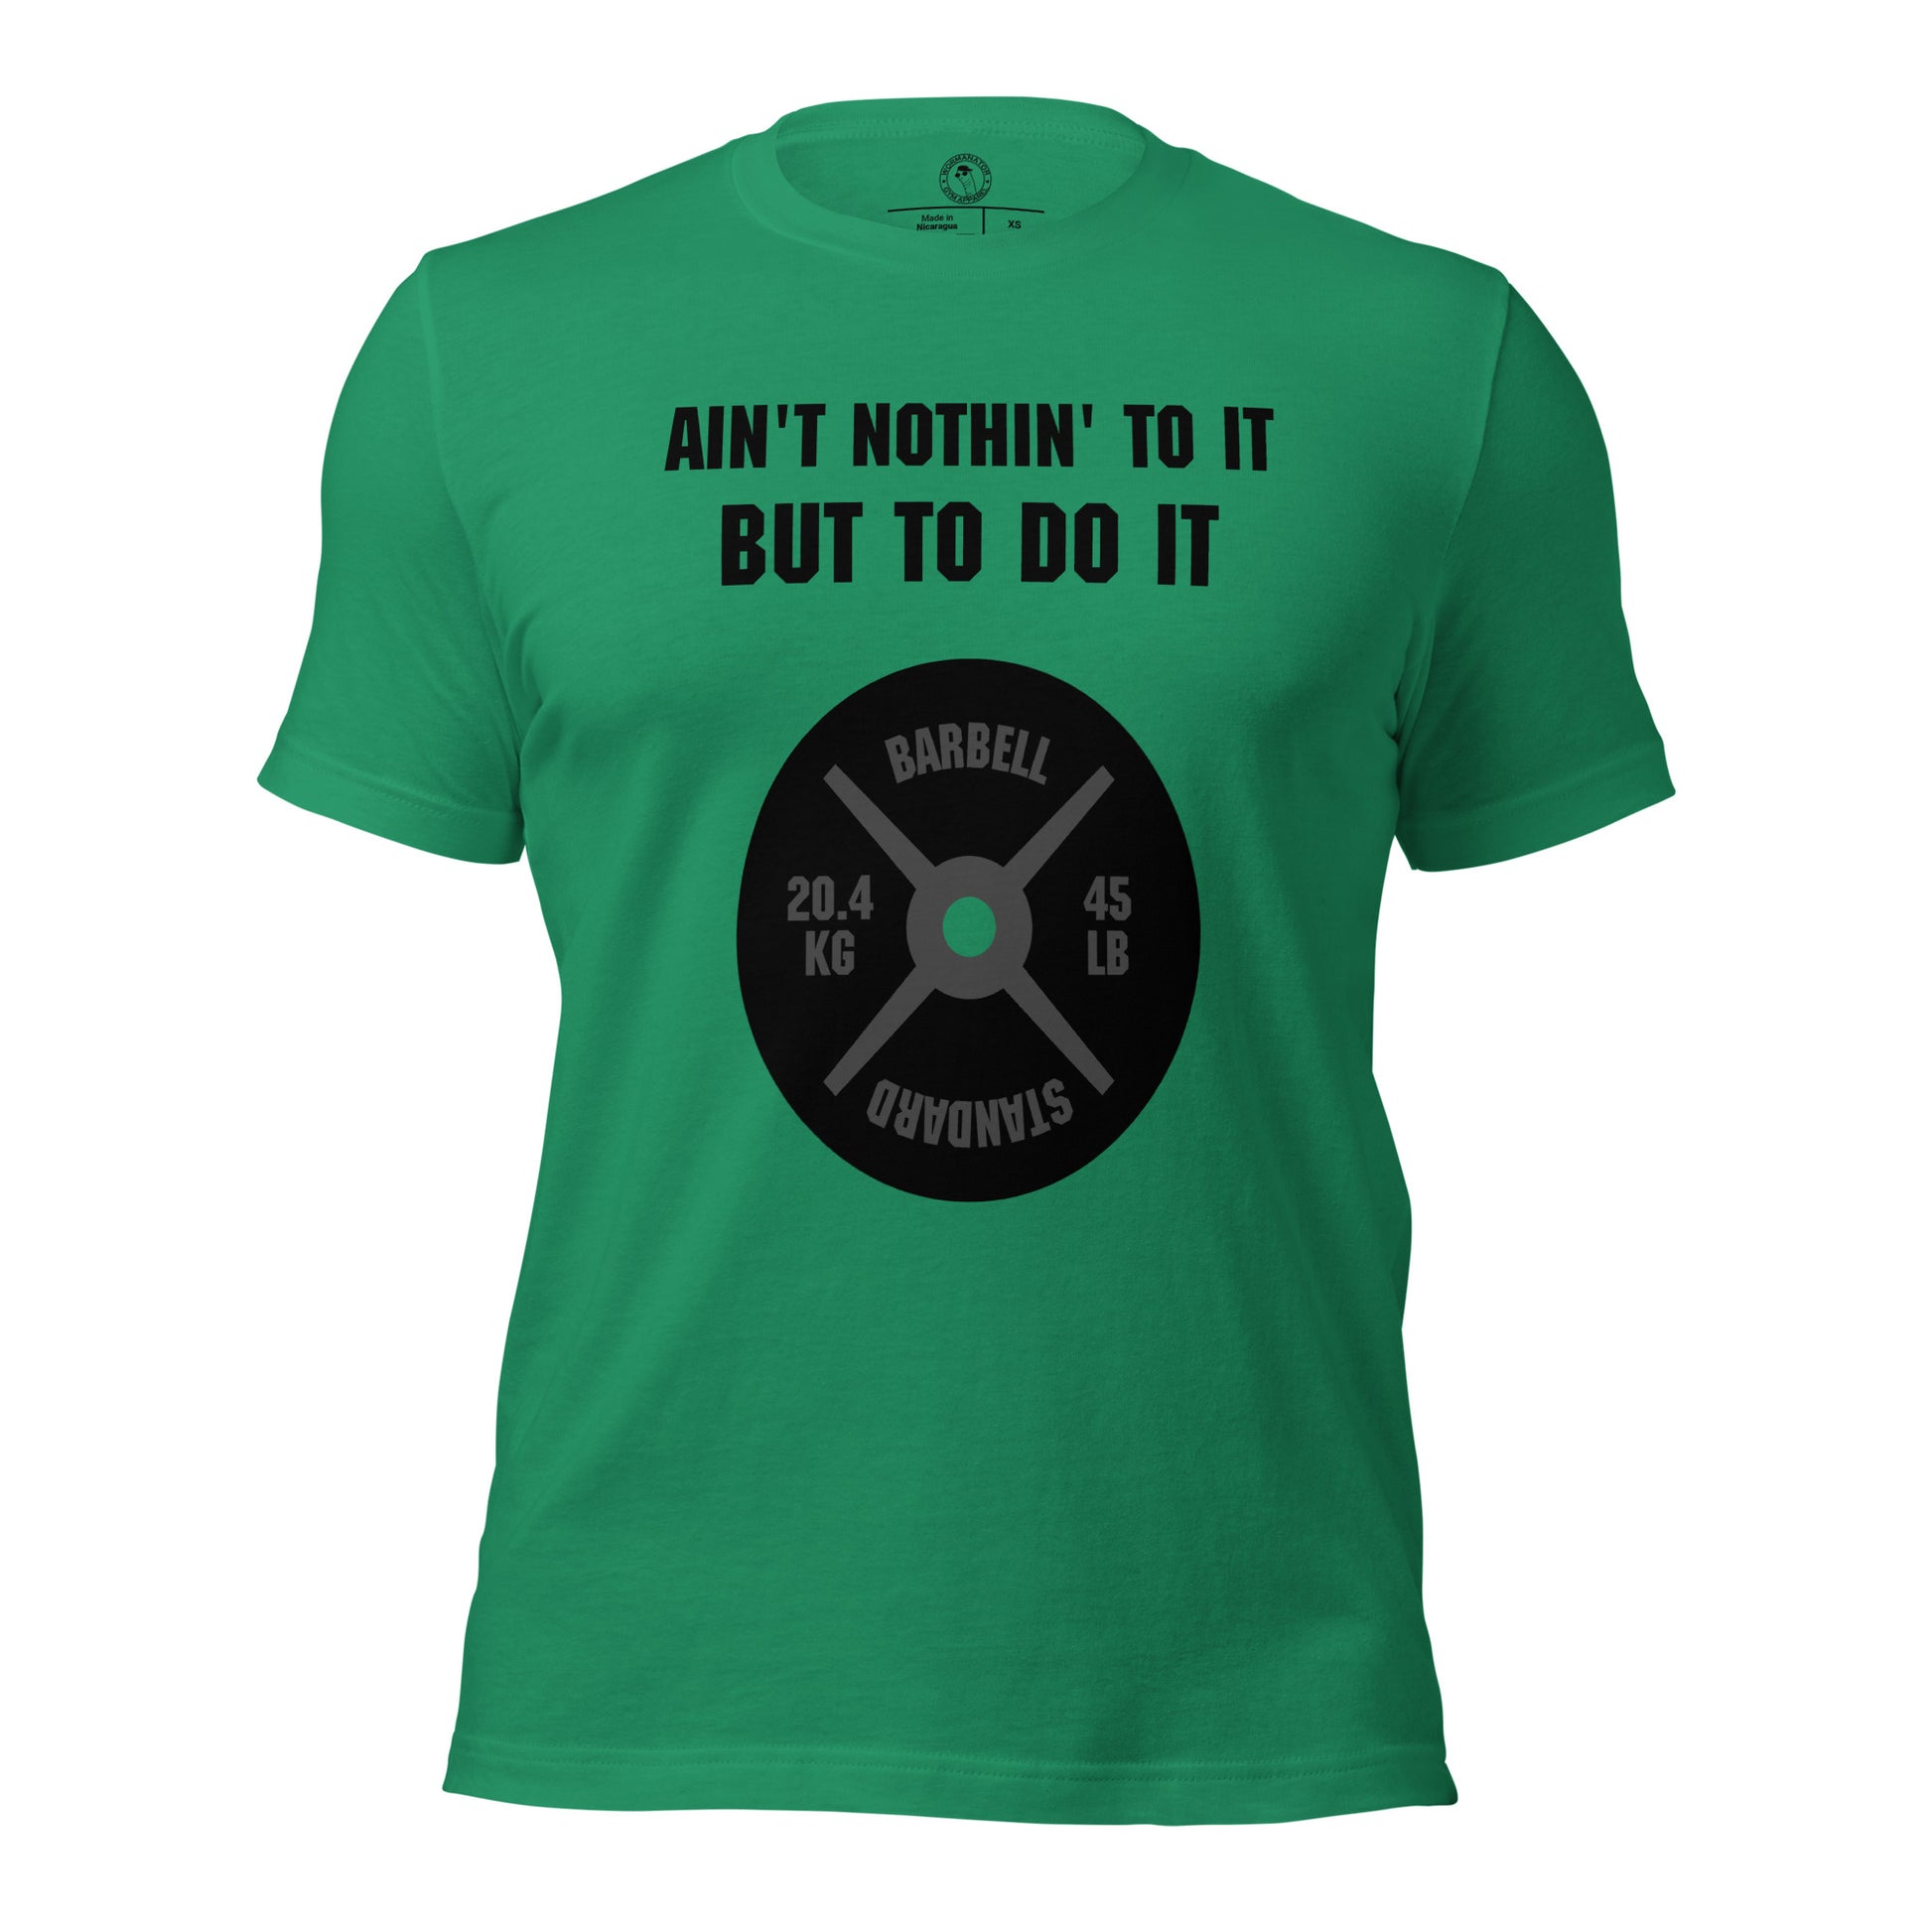 Ain't Nothin' To It But To Do It Shirt in Kelly Green